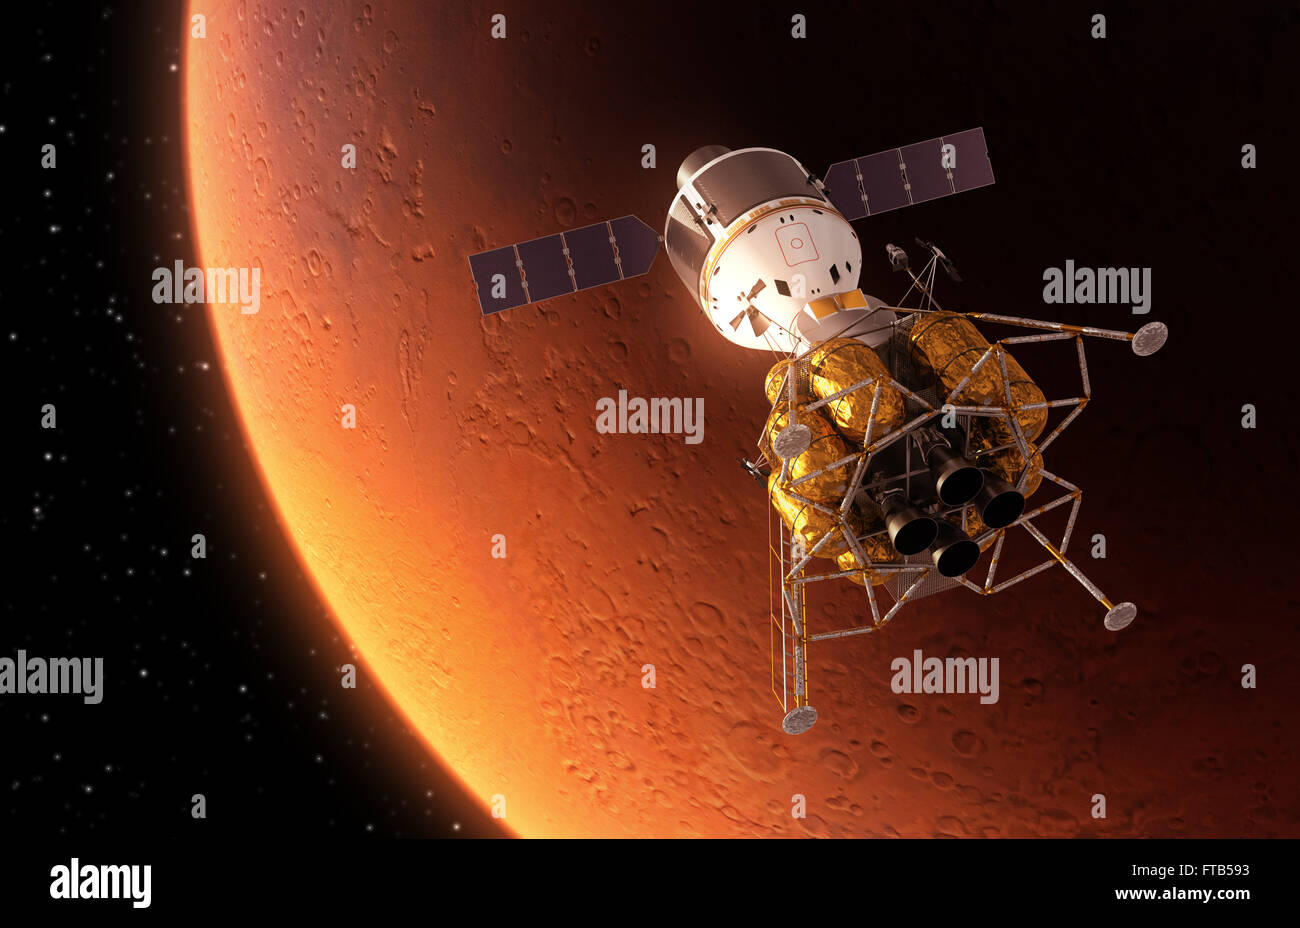 Interplanetary Space Station Orbiting Red Planet Stock Photo